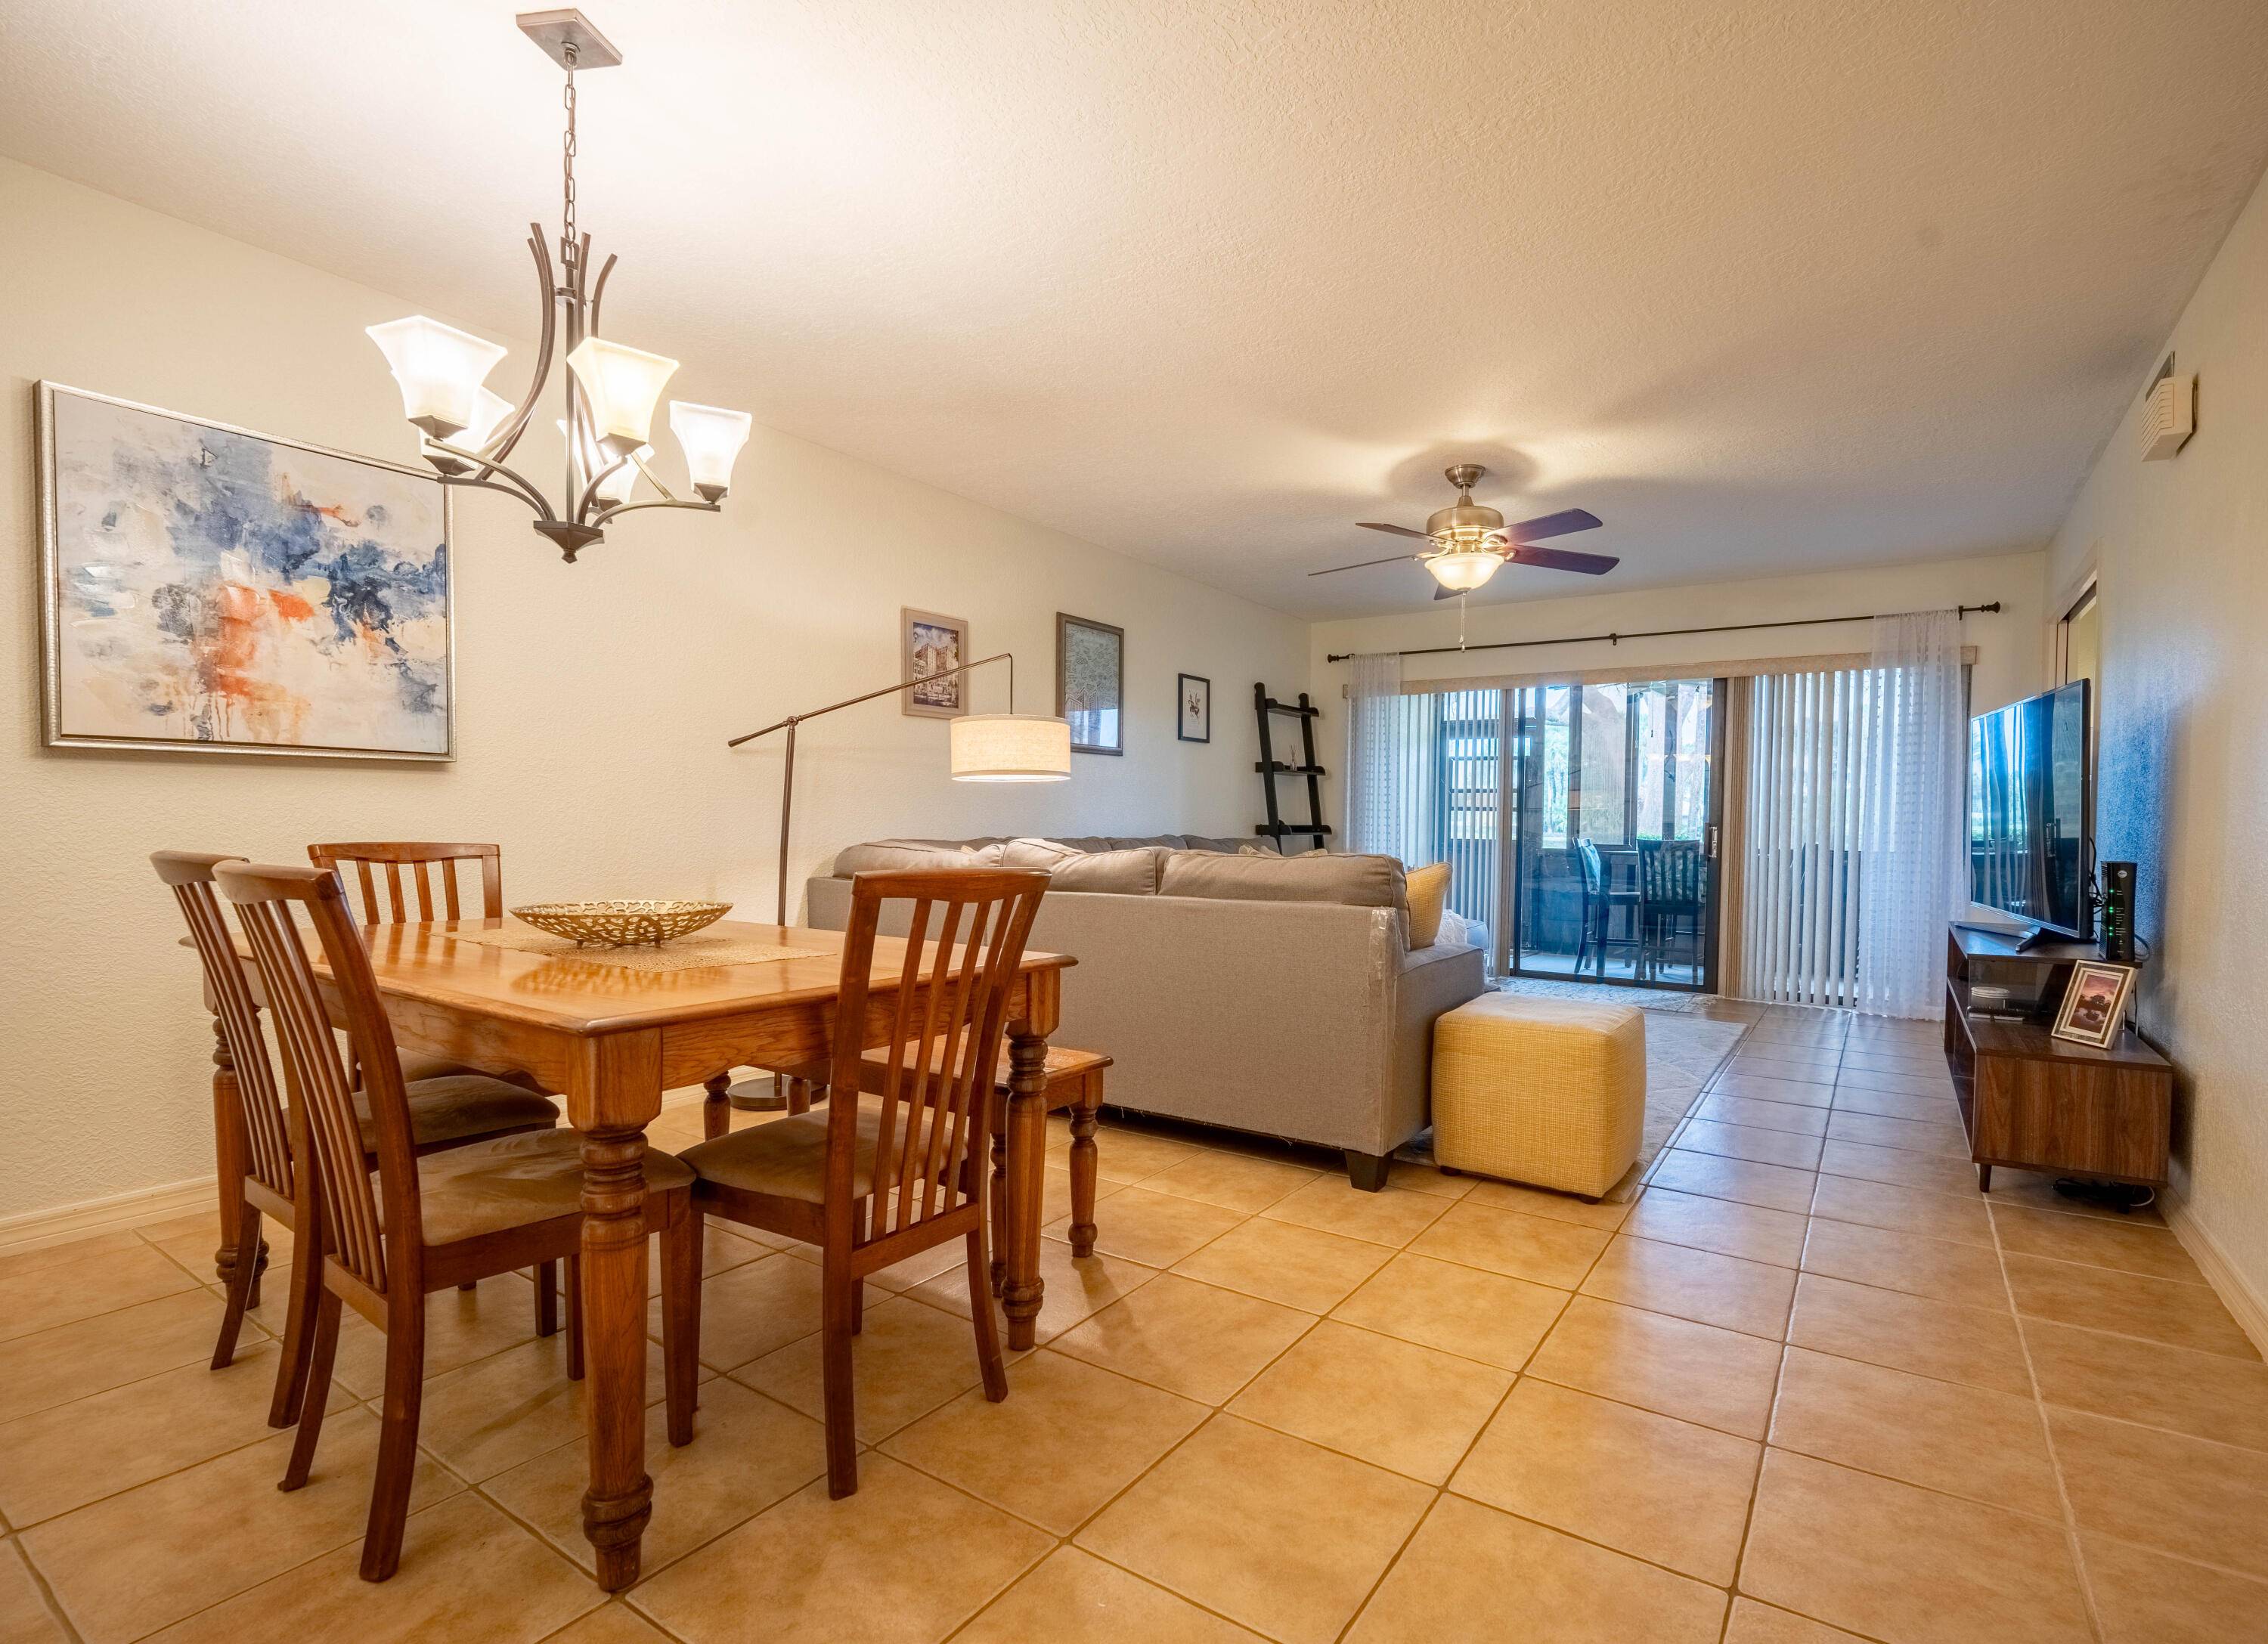 Charm says it all for this two bedroom, two bath, central Delray Beach condo first floor unit.